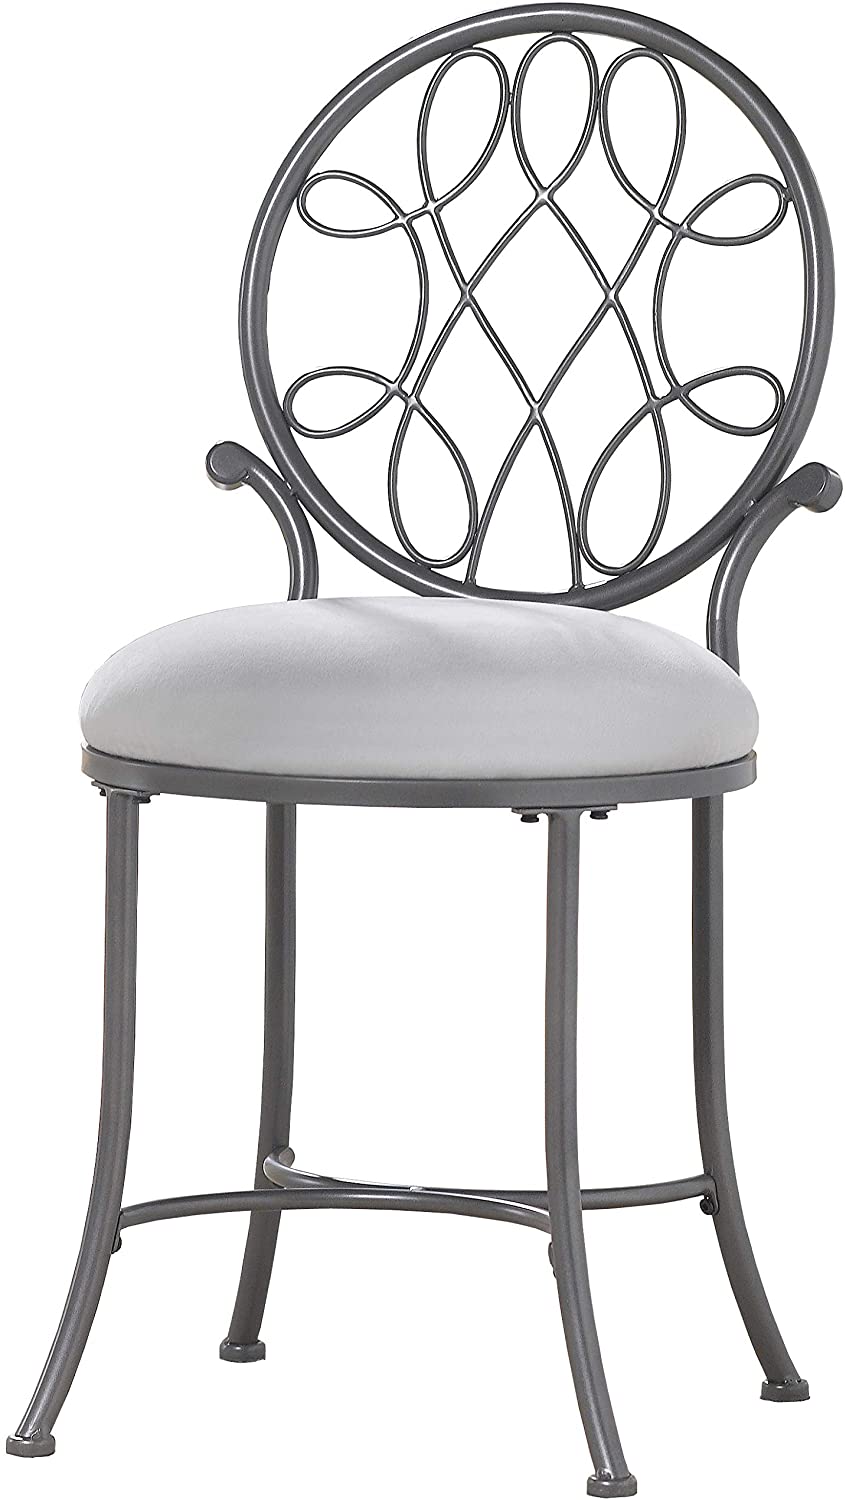 The Best Vanity Chairs September 2021, Vanity Chairs With Backs